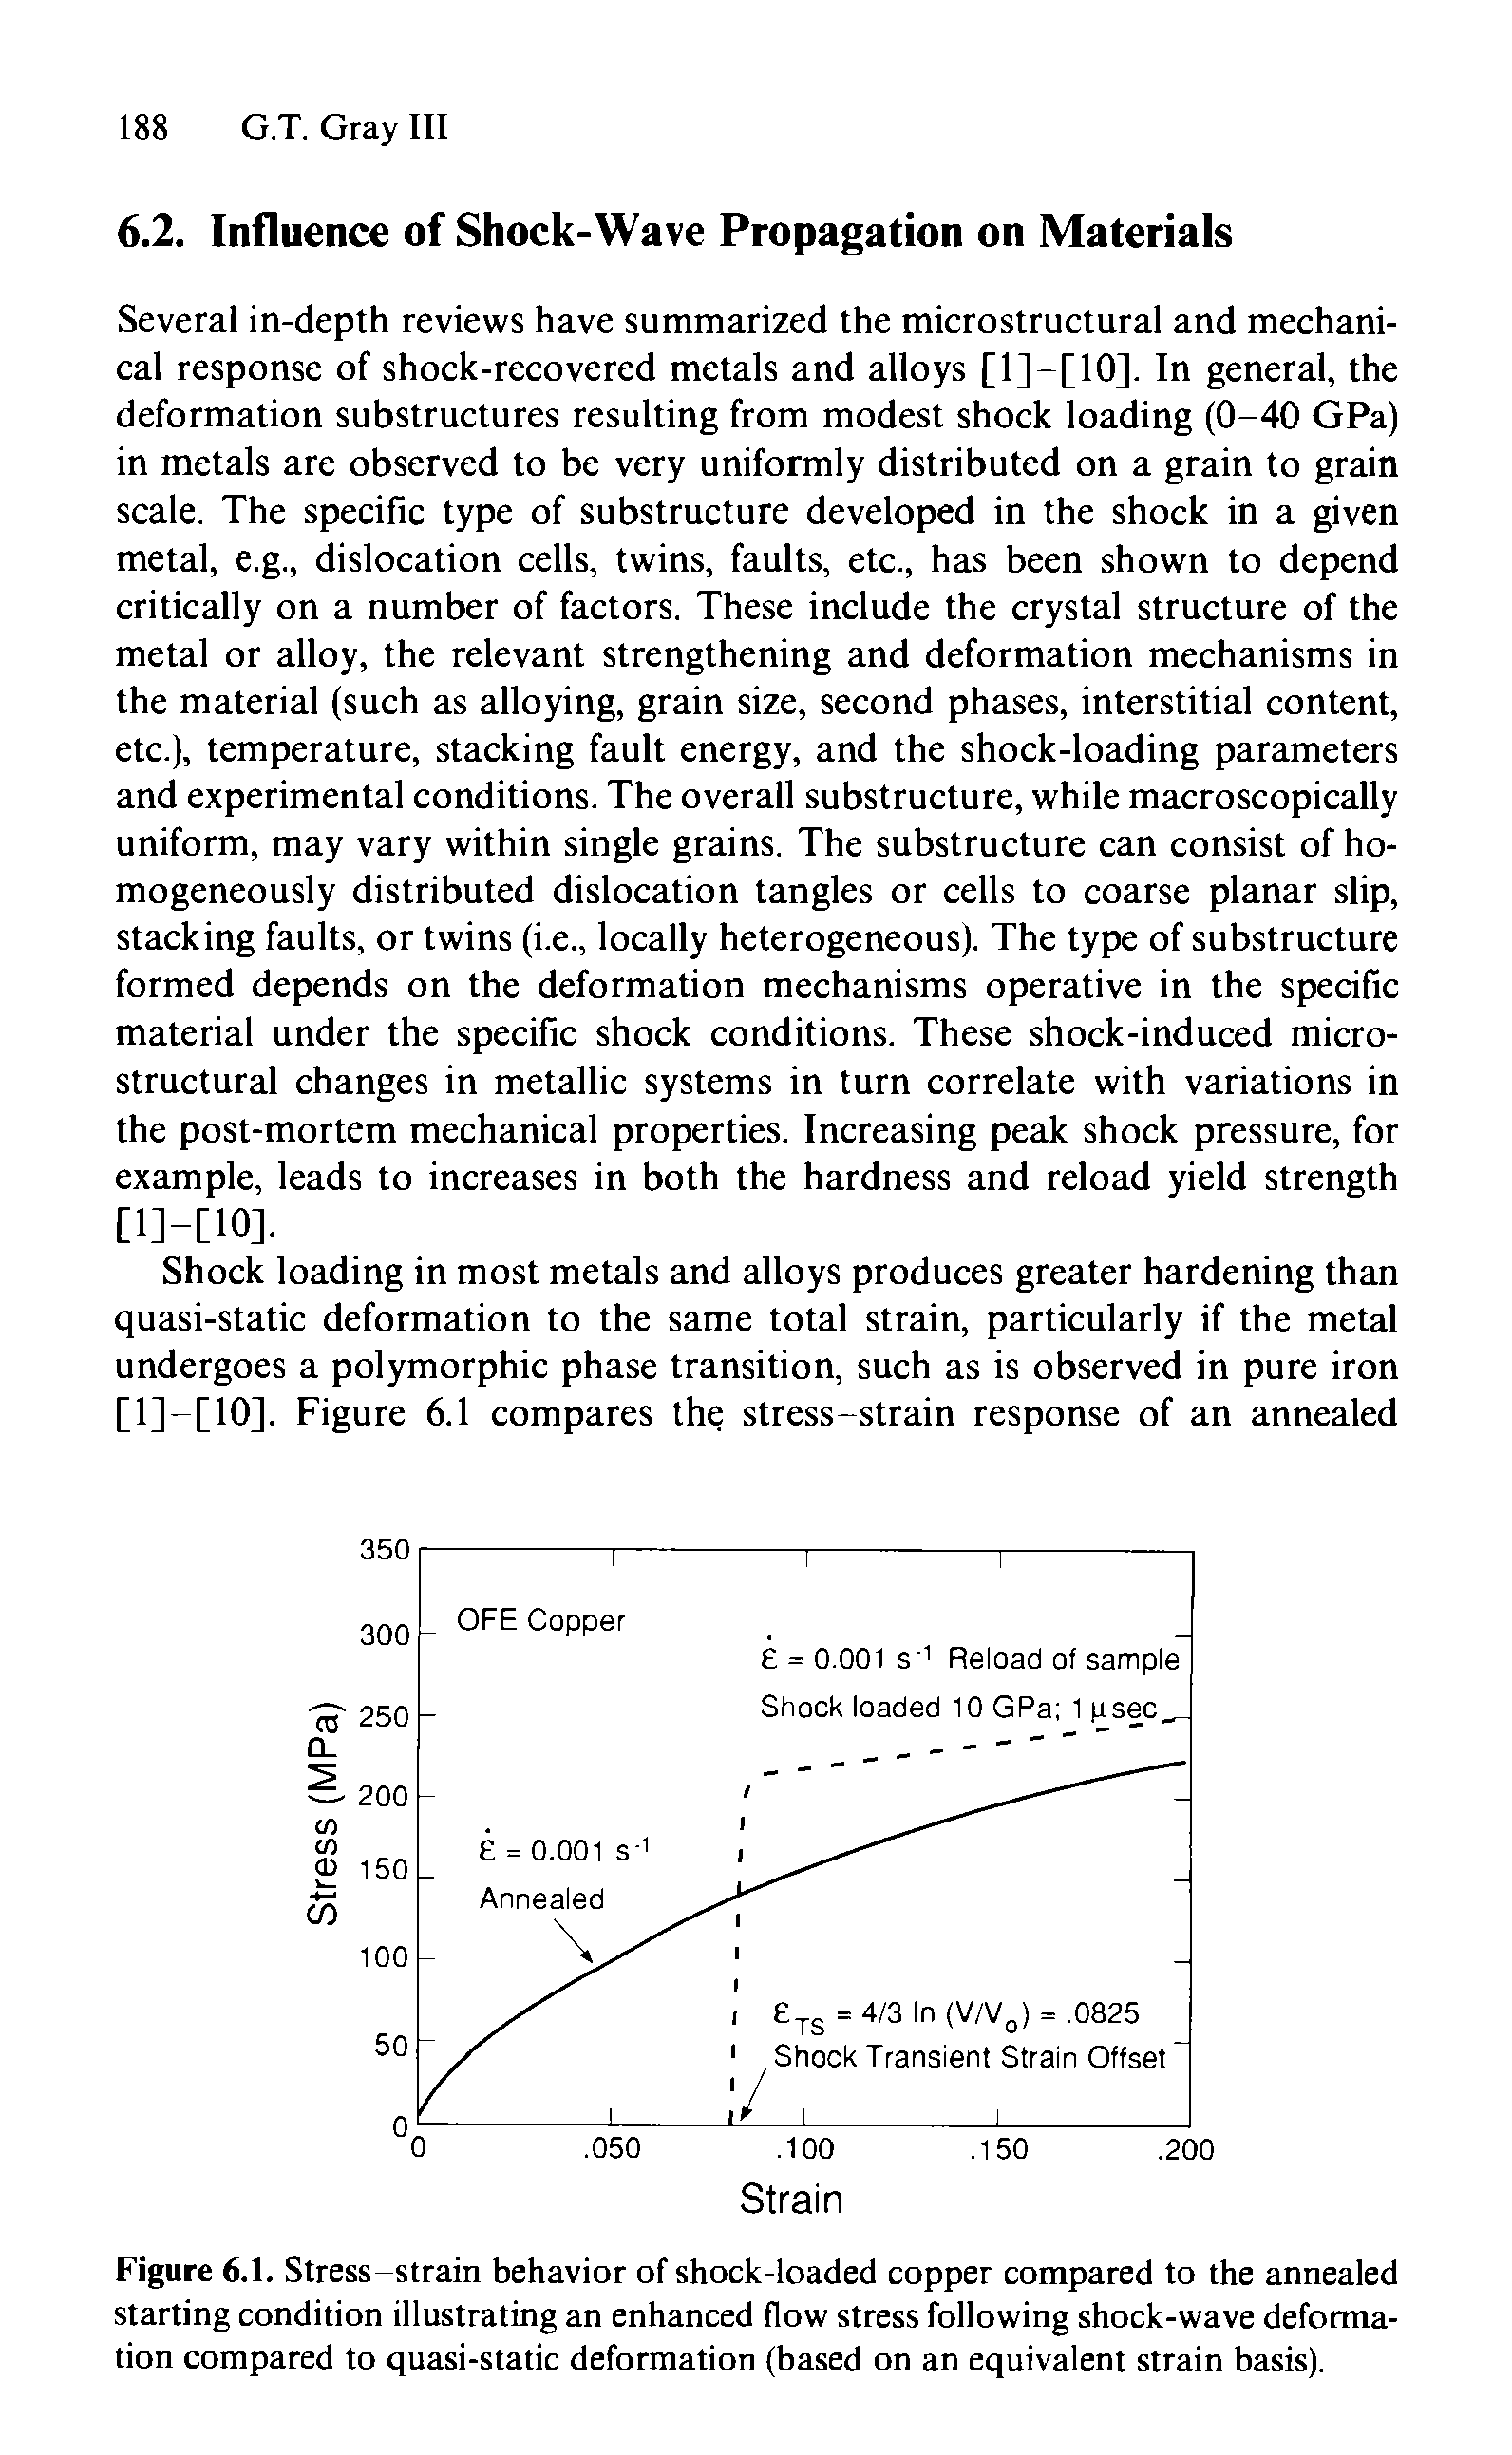 Figure 6.1. Stress-strain behavior of shock-loaded copper compared to the annealed starting condition illustrating an enhanced flow stress following shock-wave deformation compared to quasi-static deformation (based on an equivalent strain basis).